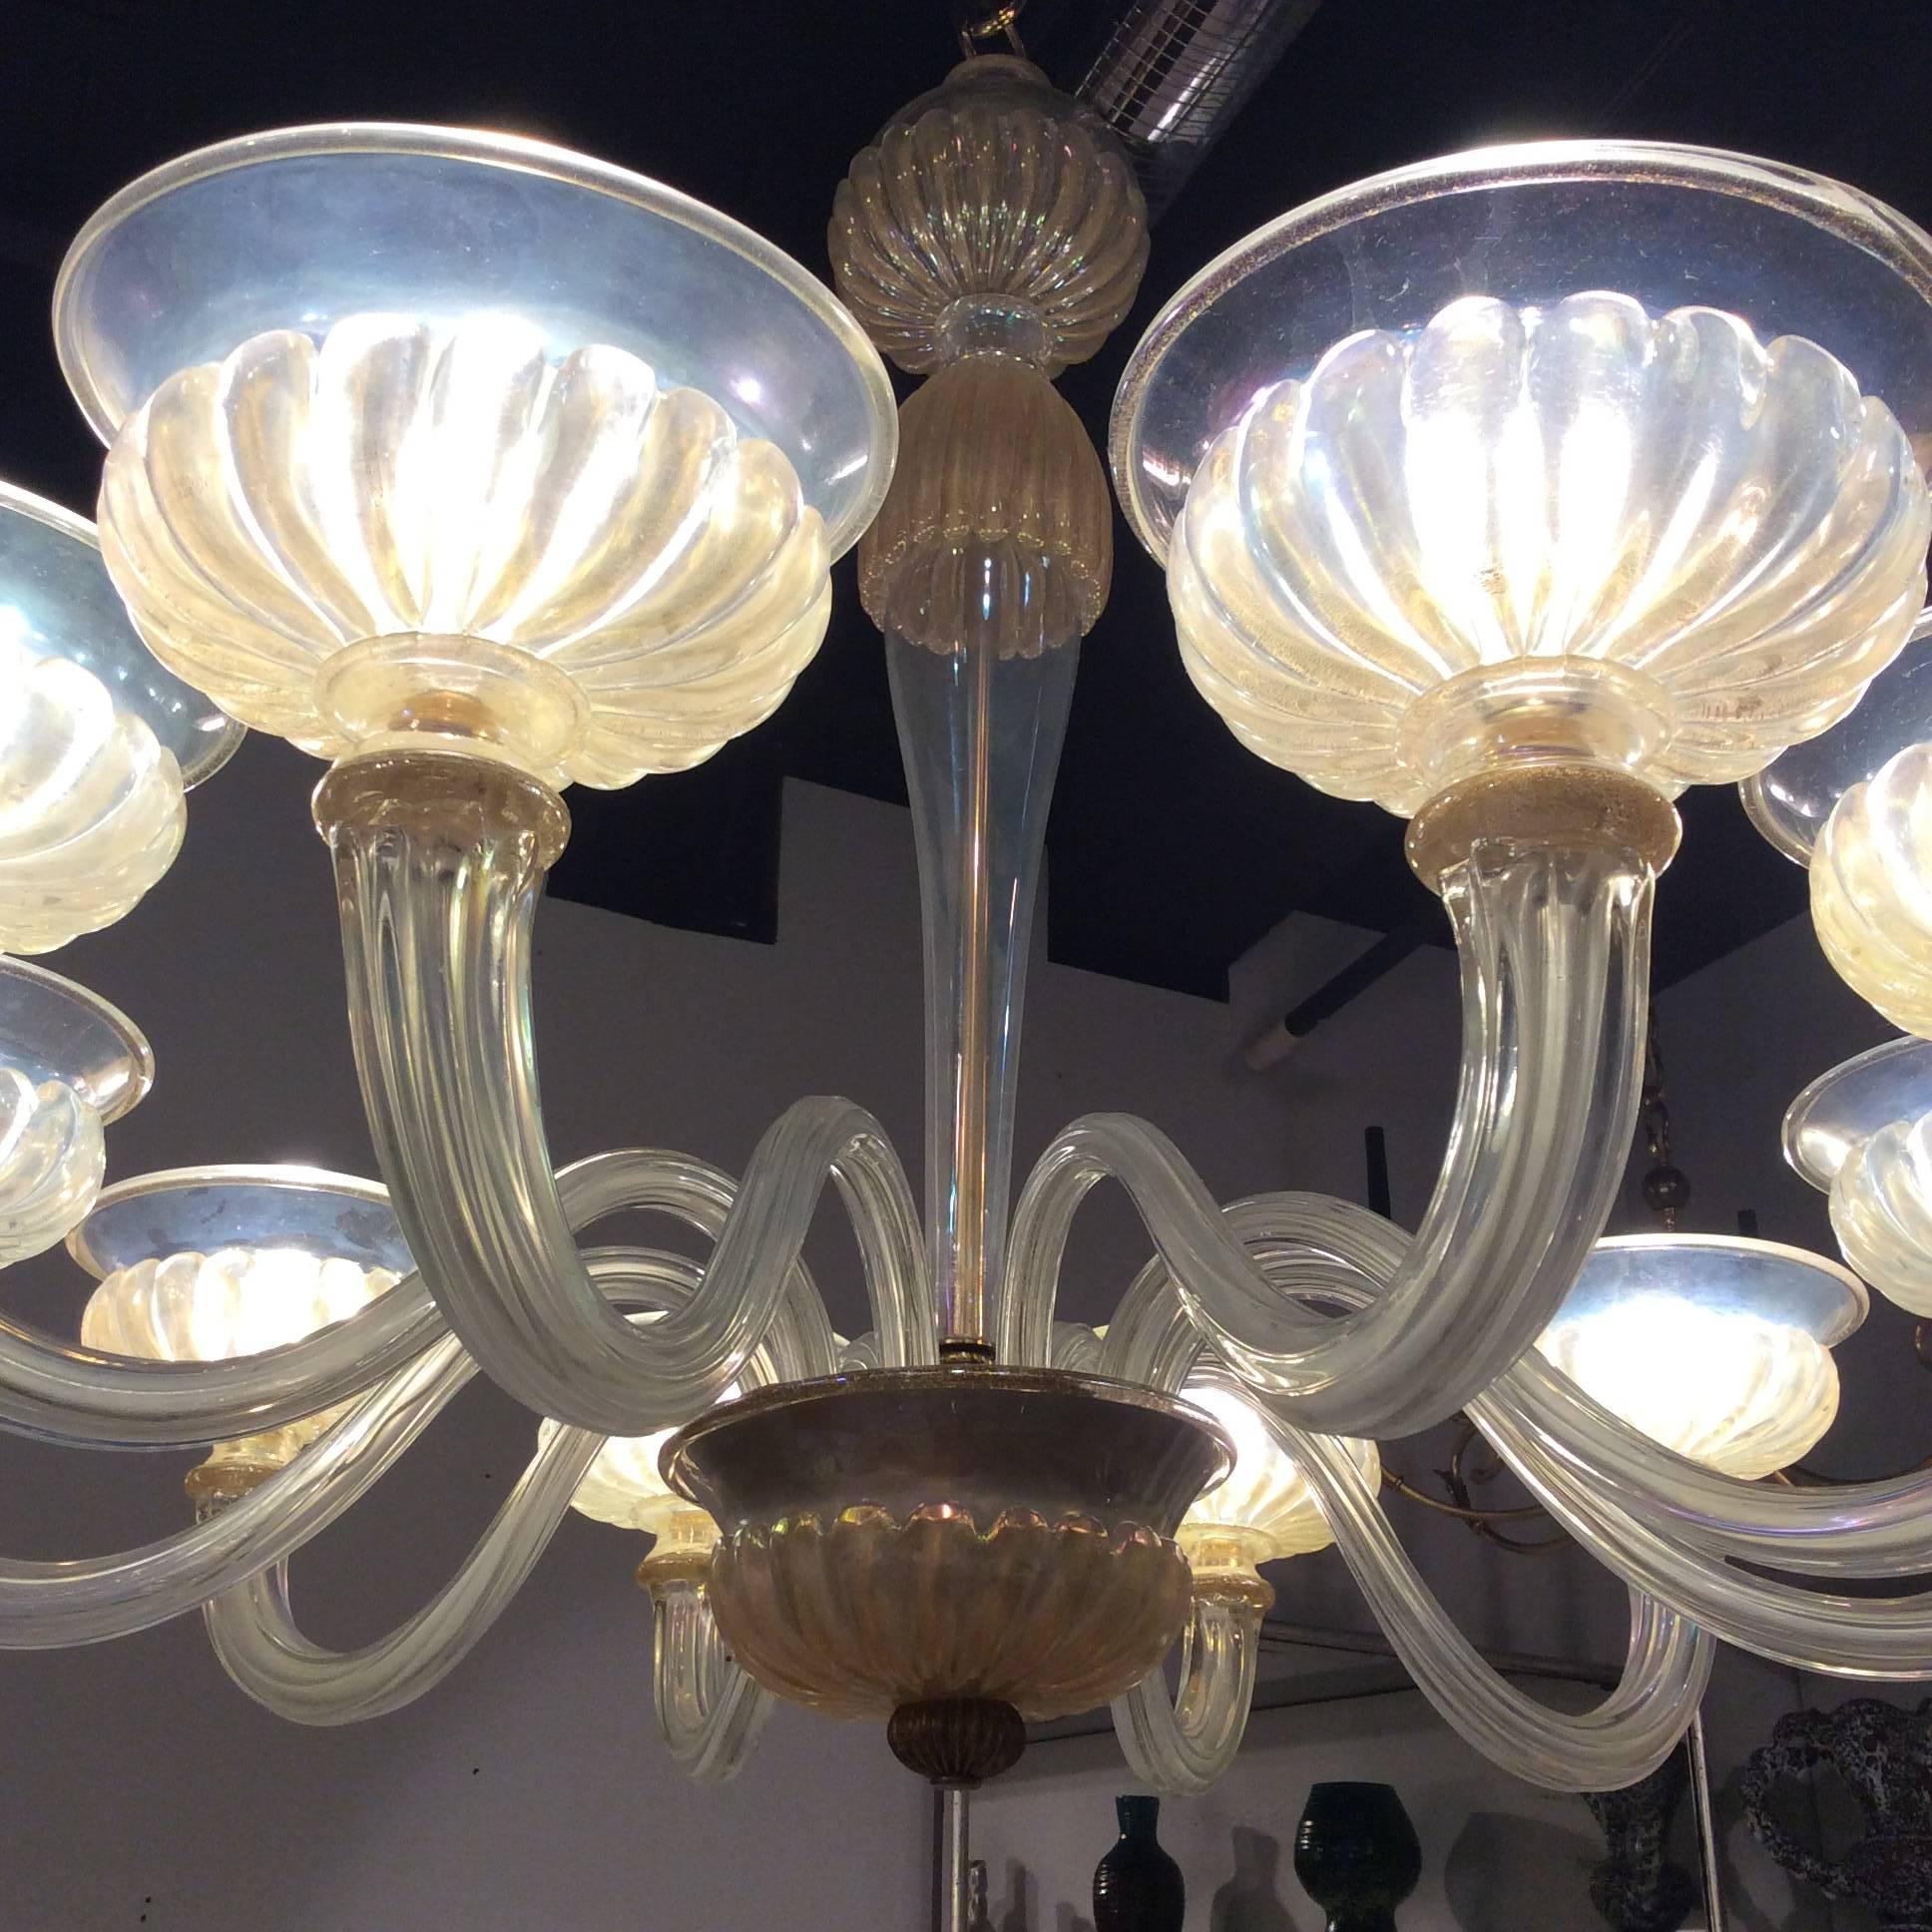 Maison Veronese chandelier attributed to André Arbus (1903-1969), circa 1940
Made of opaline glass that is no longer manufactured today.
Beautiful Classic model of the 1940s.

More about André Arbus:
André Arbus was a decorator, furniture designer,